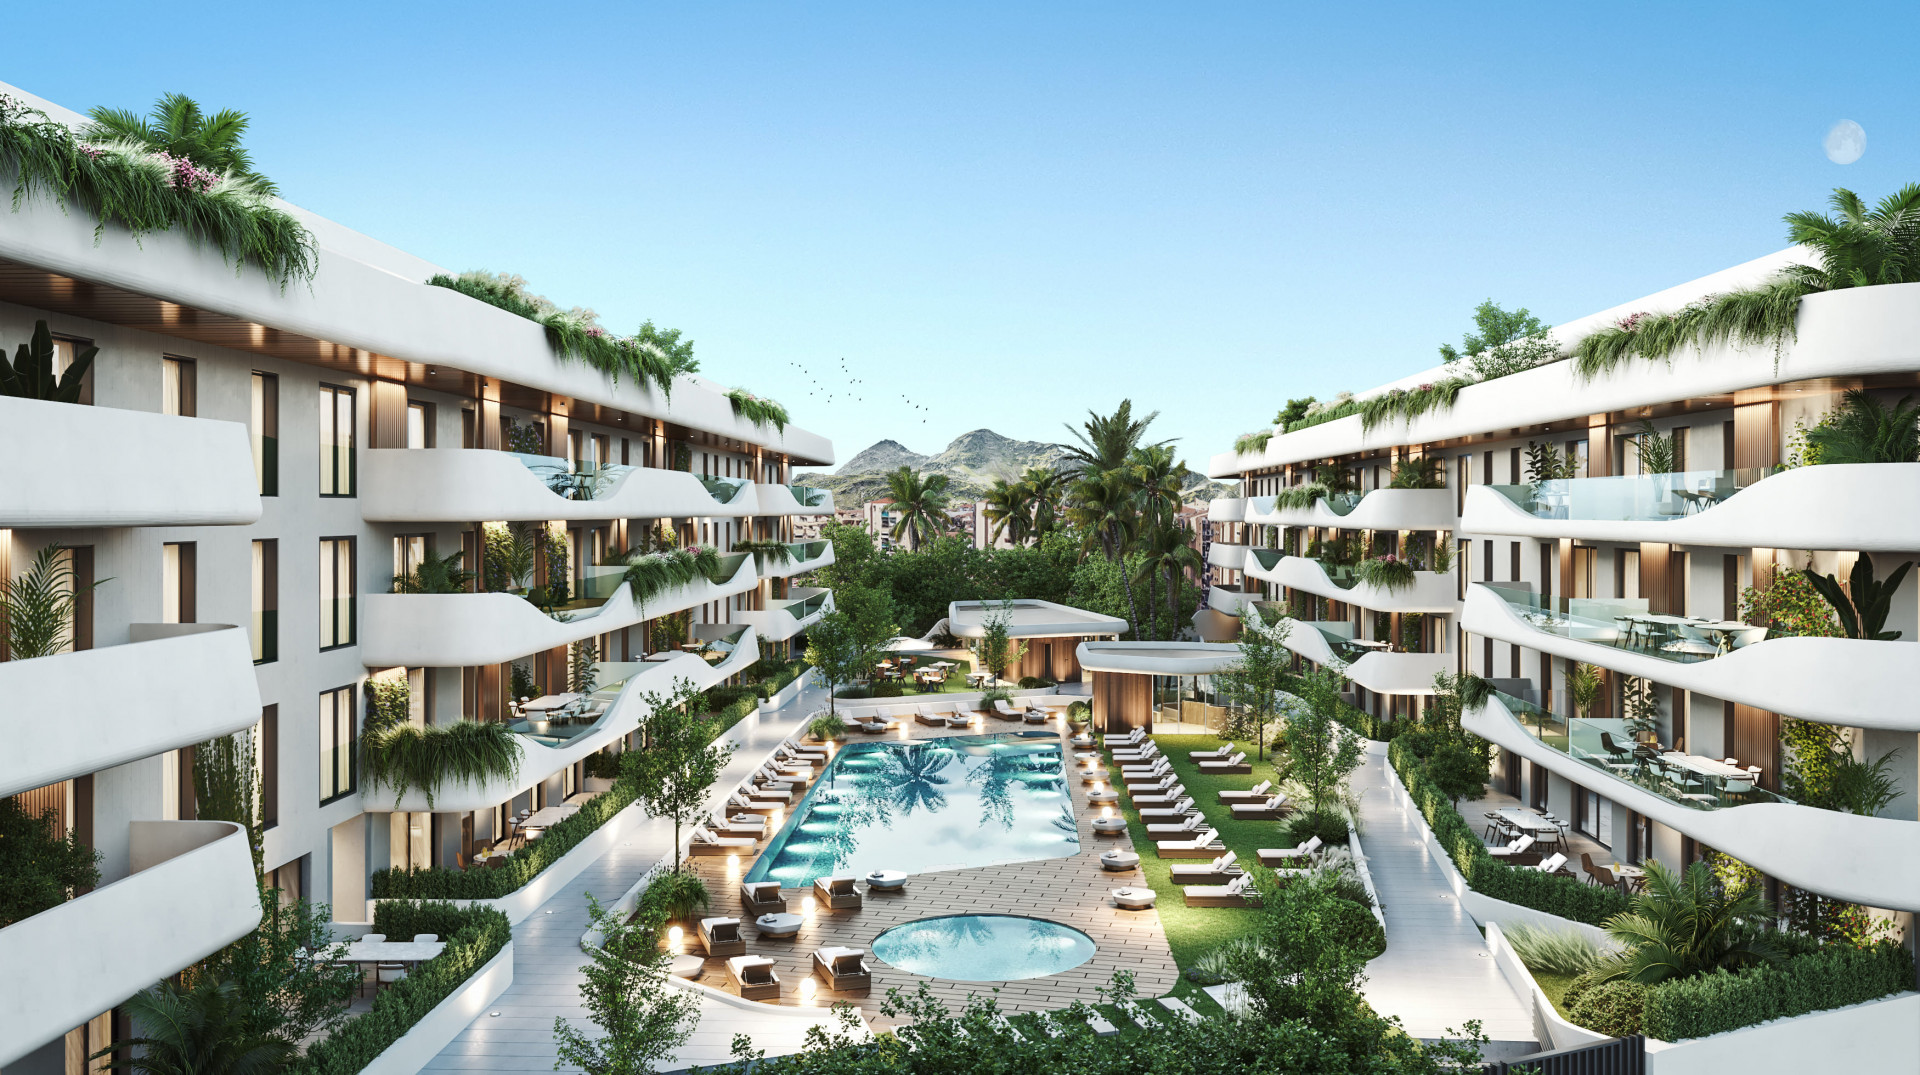 New and exclusive apartment complex offering 2 to 4 bedroom apartments and penthouses walking distance to San Pedro Alcantara